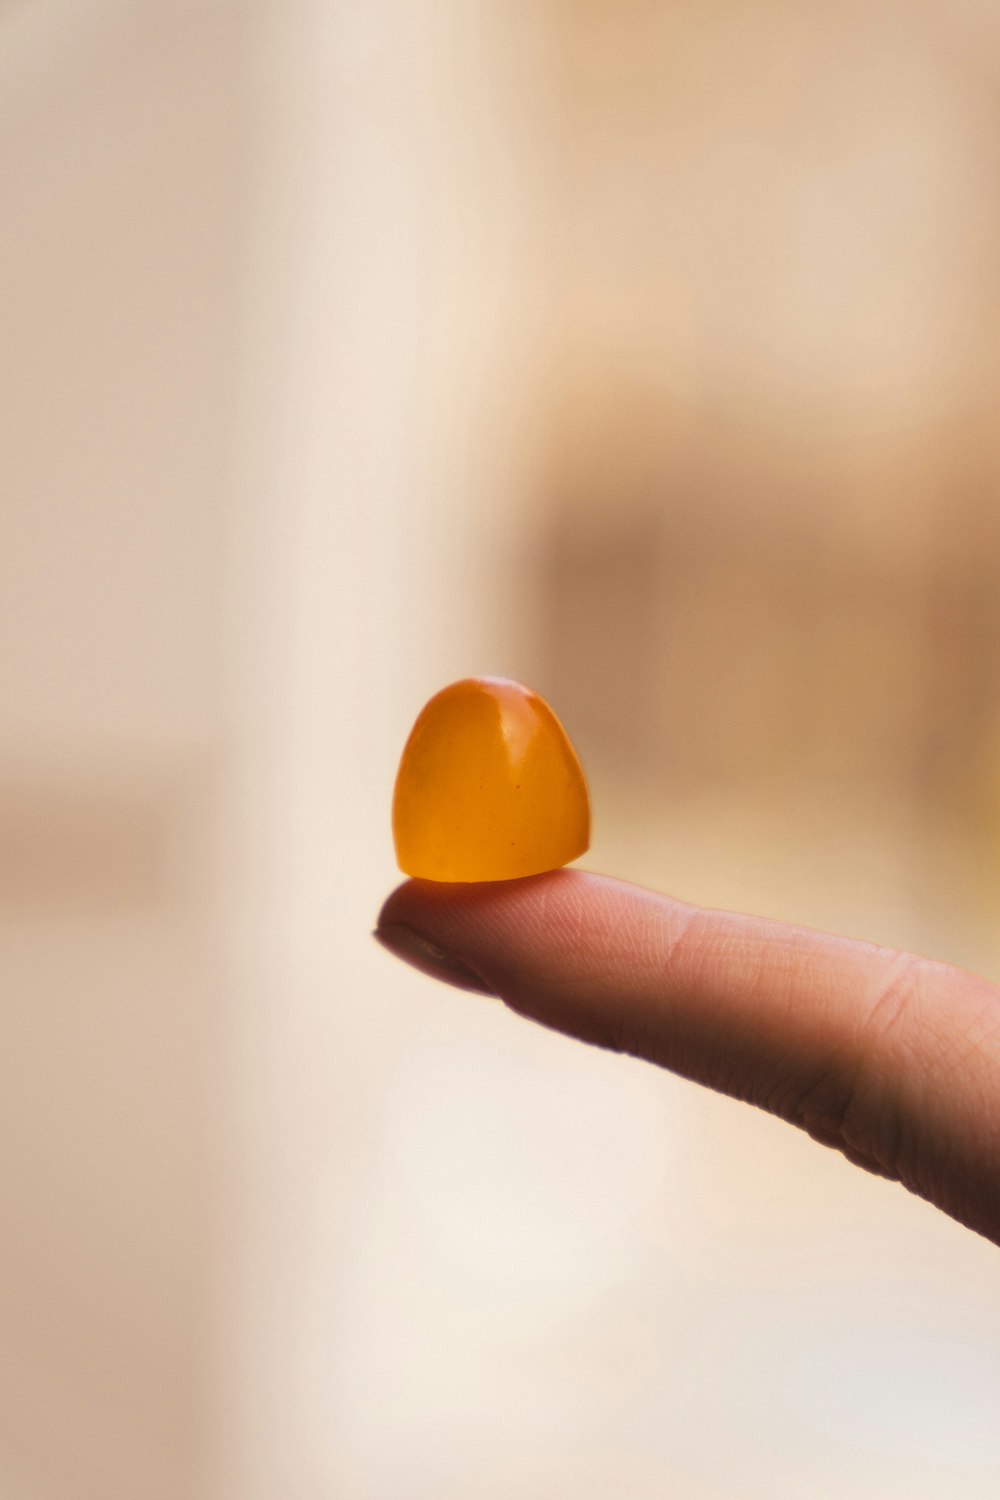 a hand holding a small orange object in it's palm